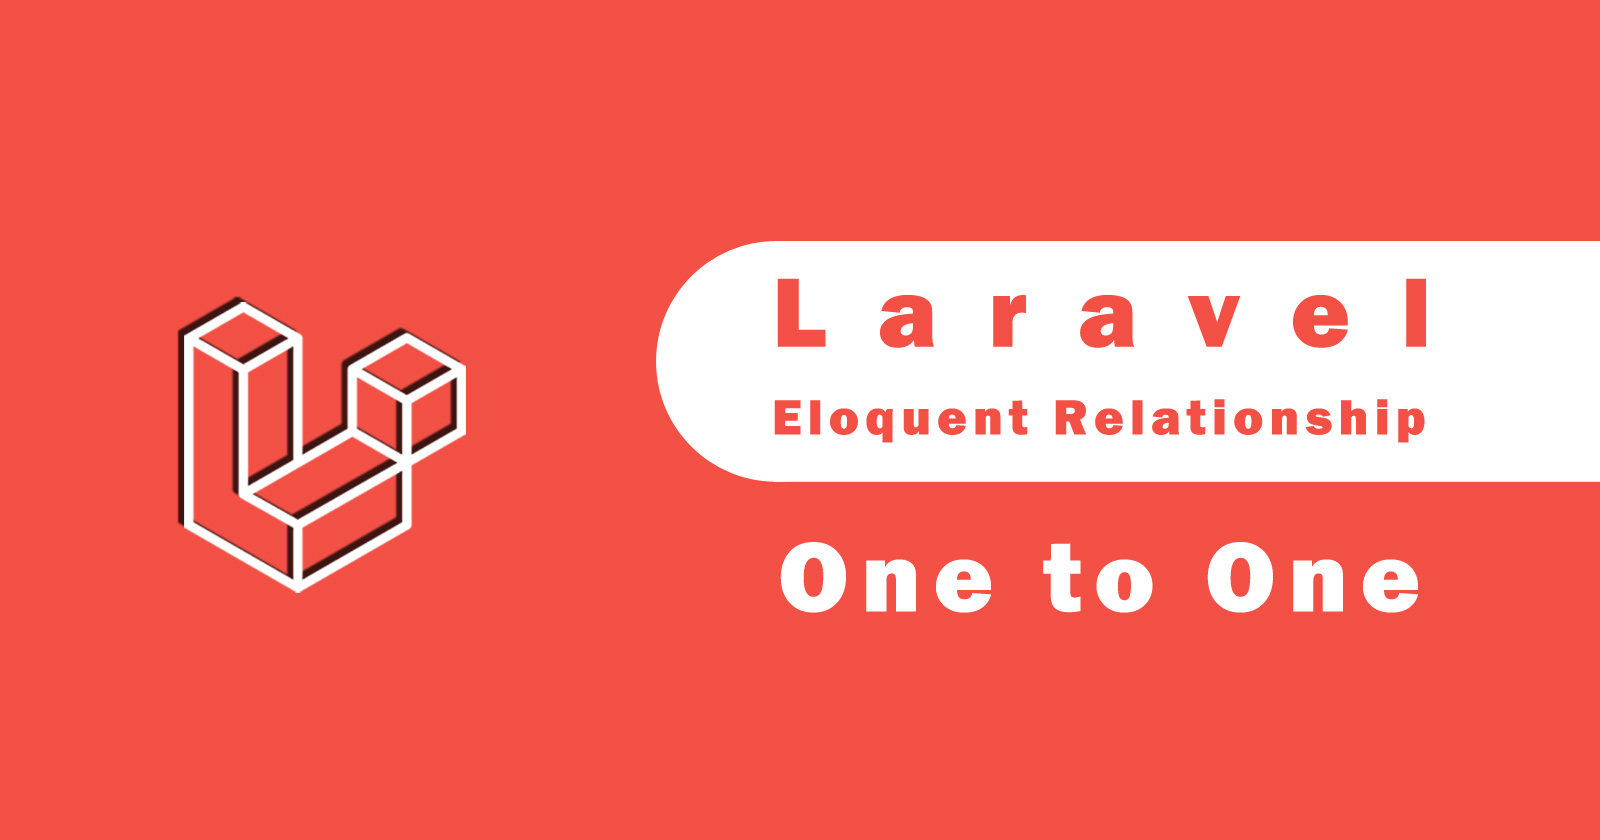 Laravel One to One Eloquent Relationship